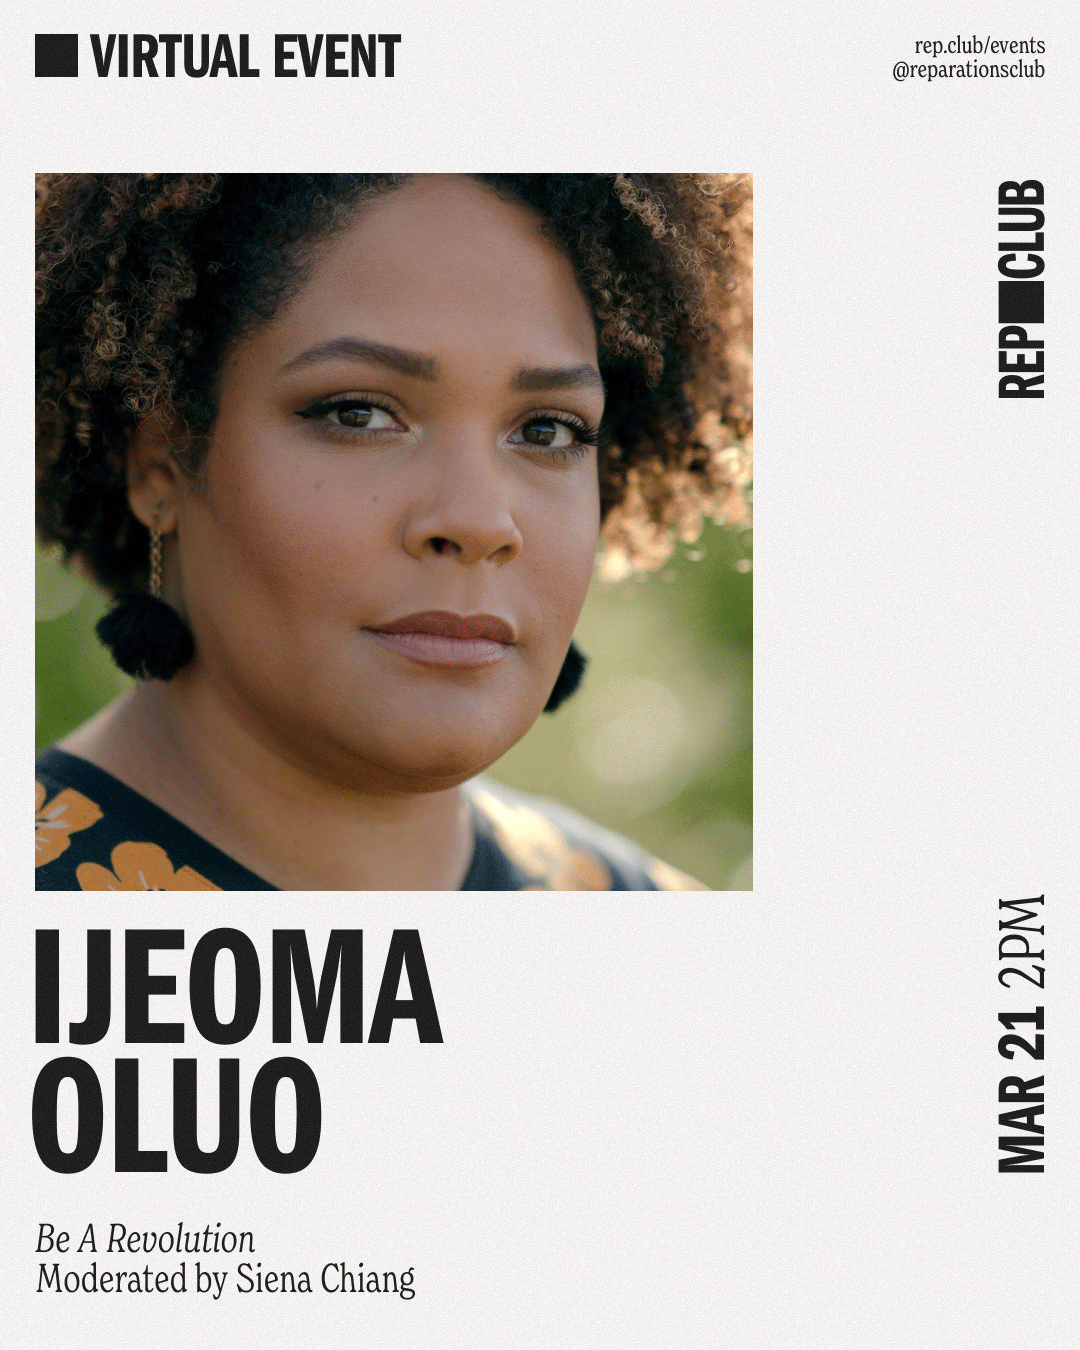 March 21st EVENT (Virtual) // Be A Revolution w/ Ijeoma Oluo + Siena Chiang